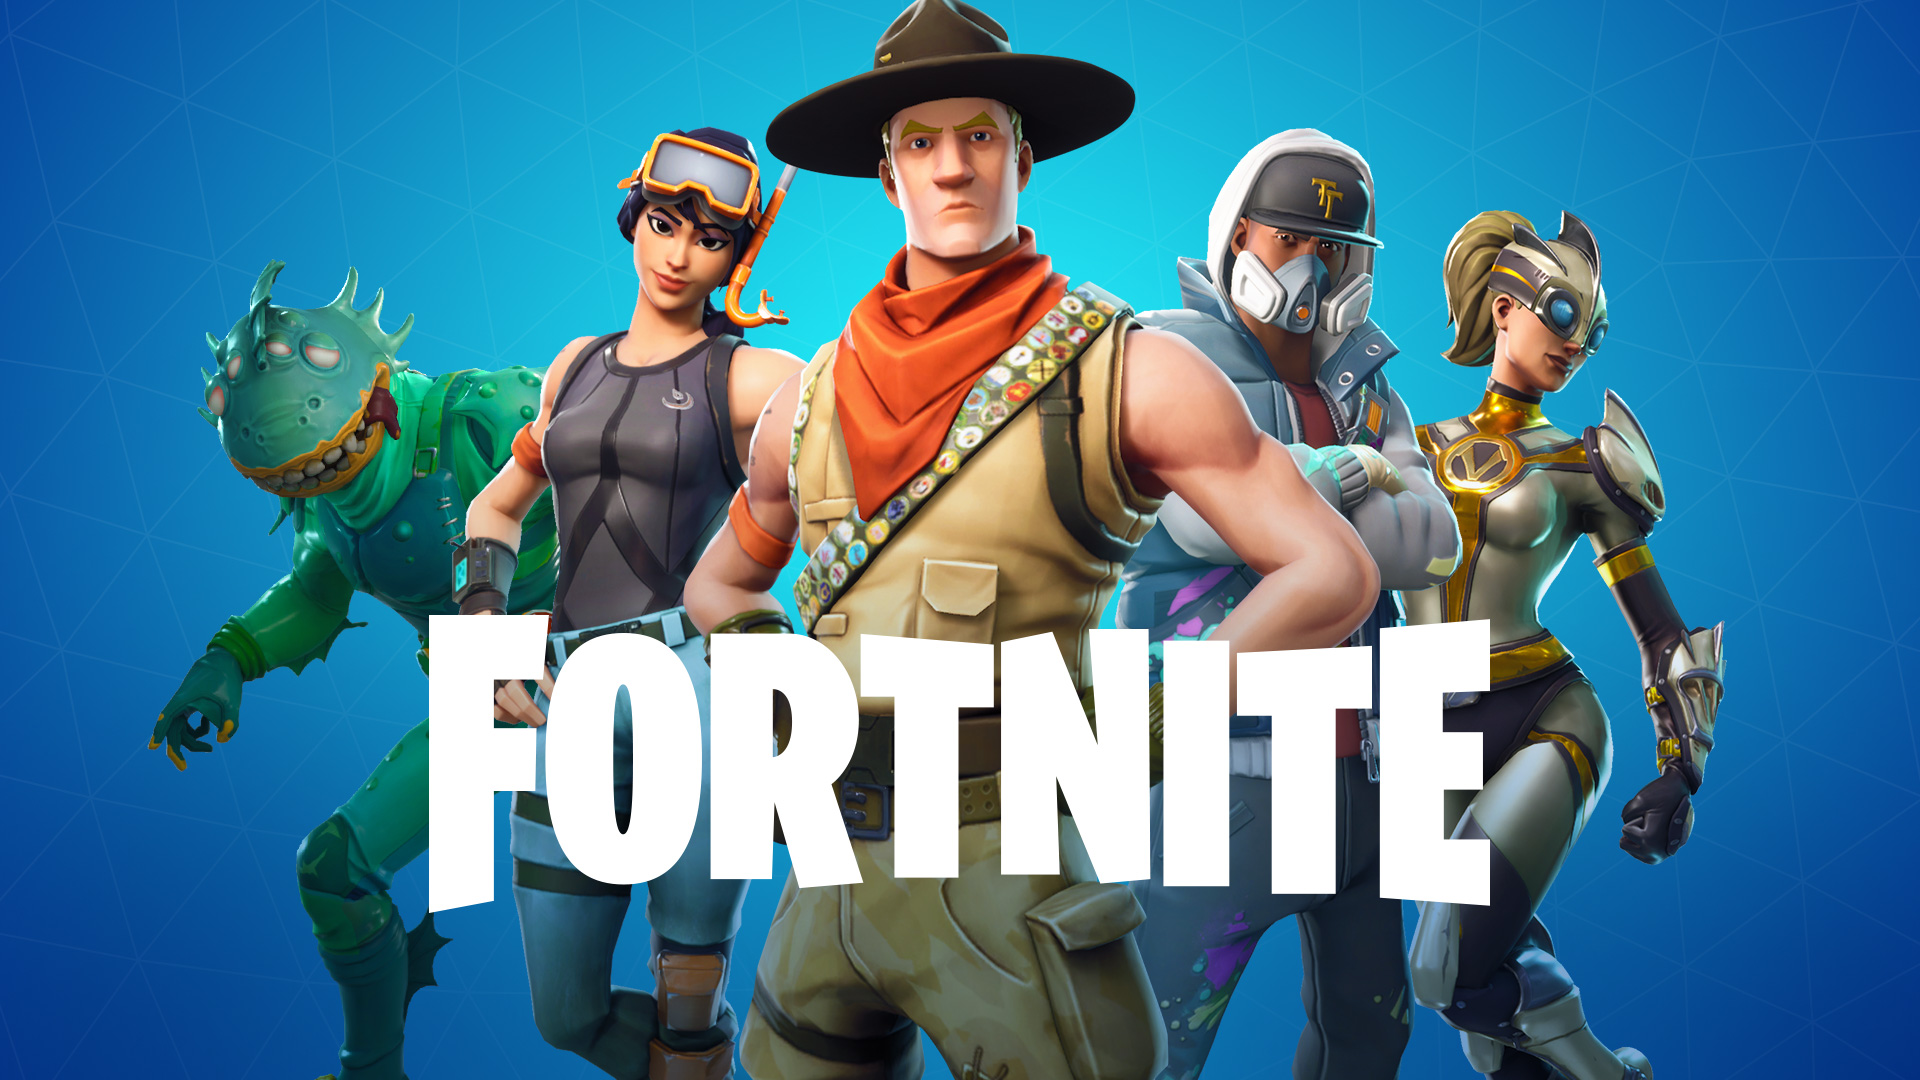 ethical questions behind fortnite s ratings jsc 419 class blog medium - game theory fortnite violence